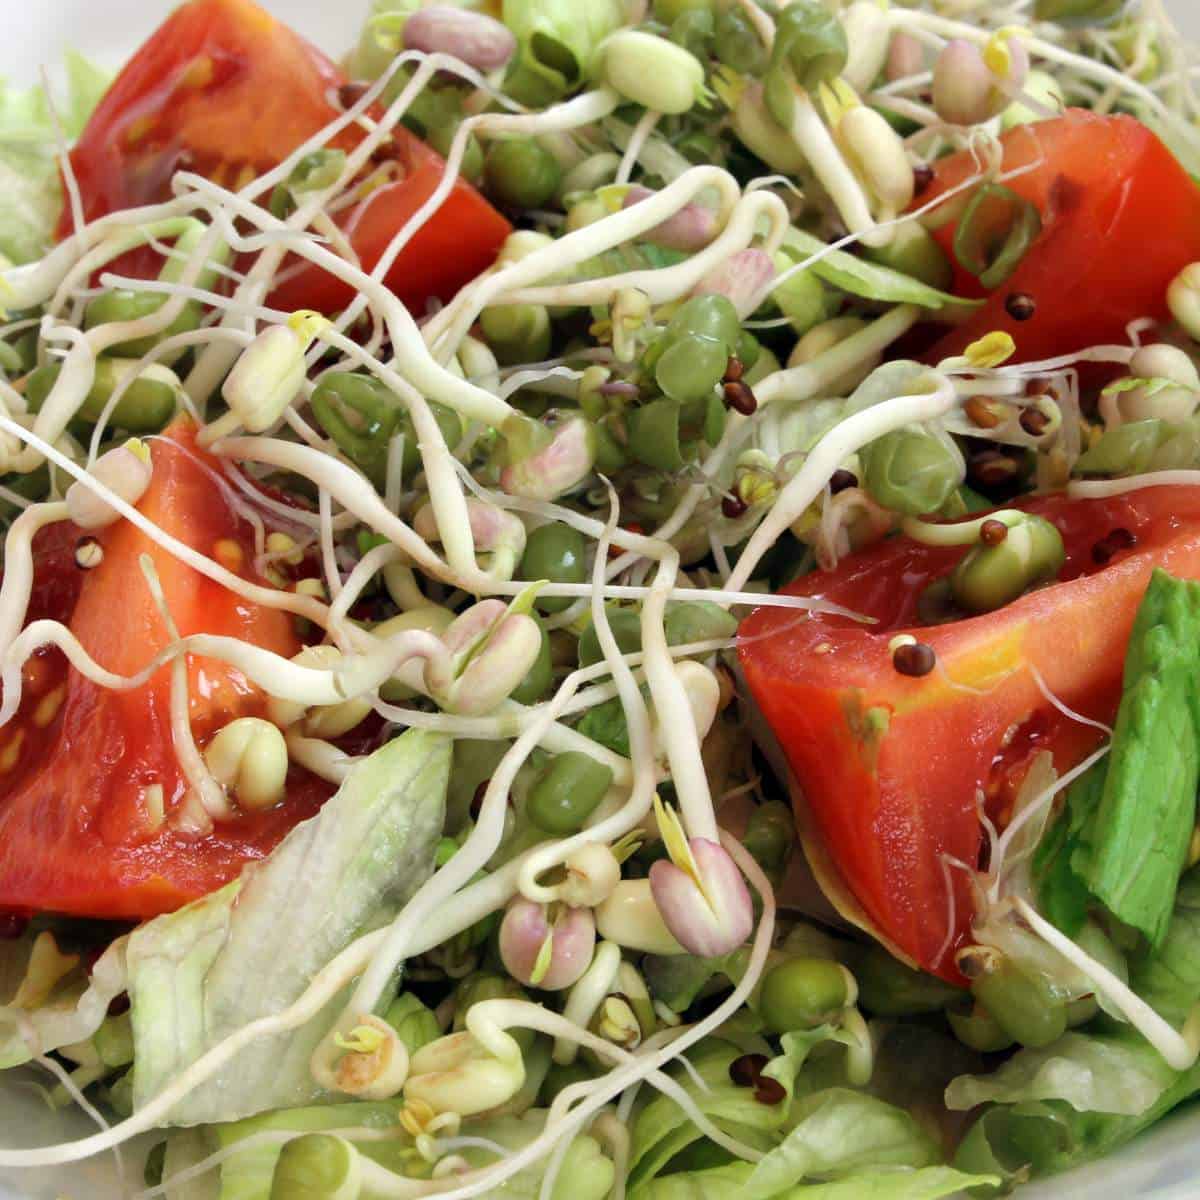 A close up of a salad with sprouts, including soybean sprouts.